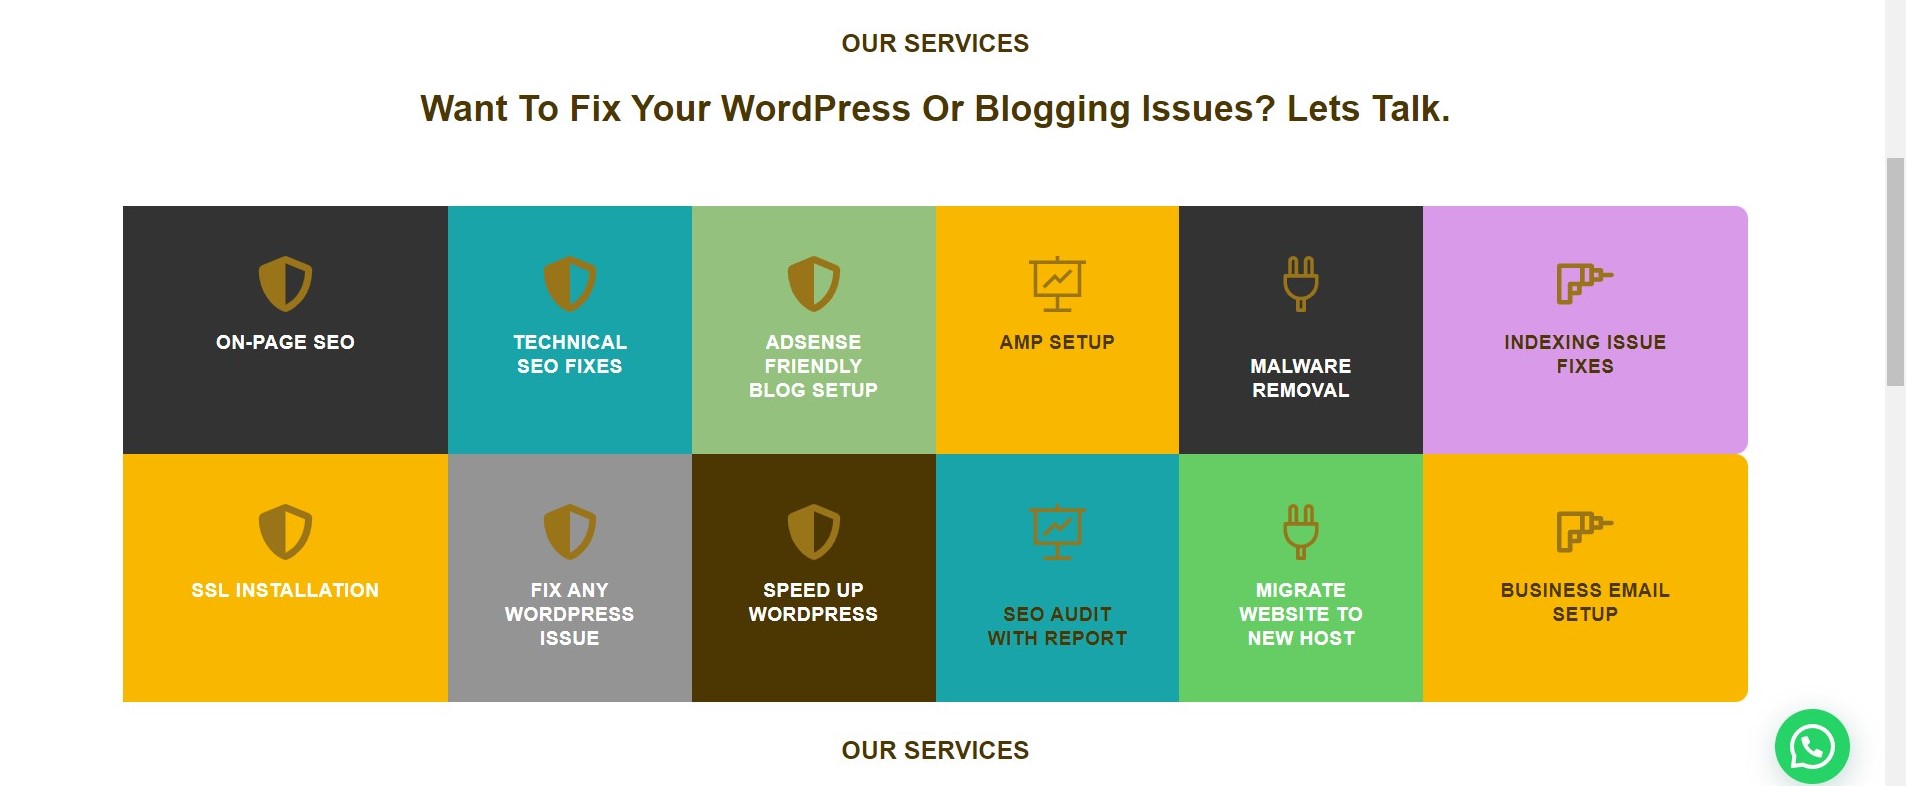 Want To Fix Your WordPress Or Blogging Issues?